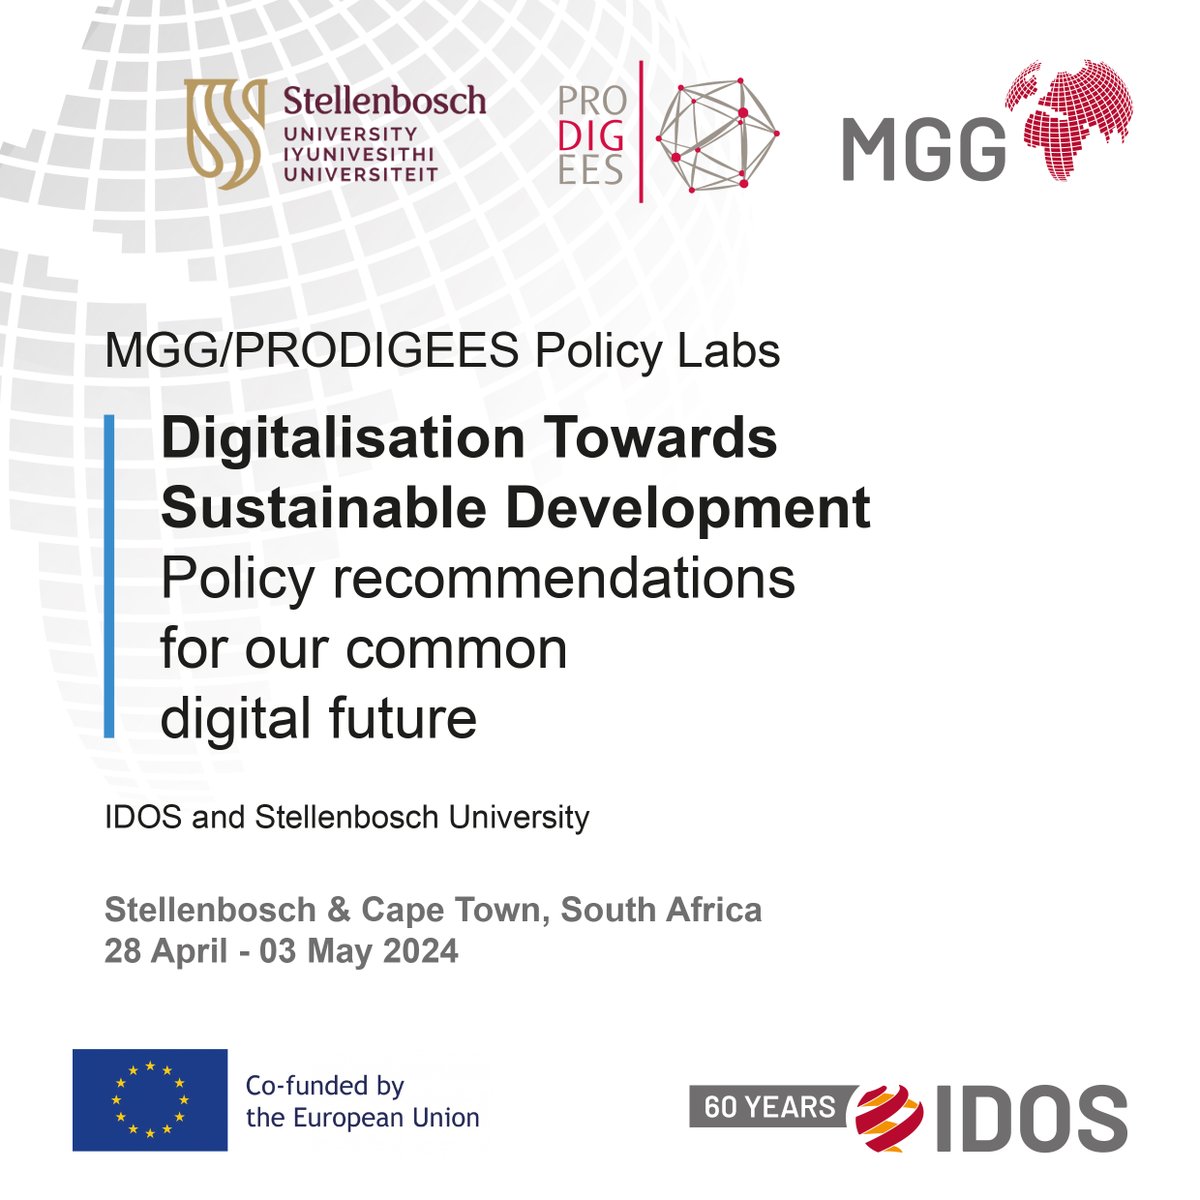 🌐 MGG/PRODIGEES Policy Labs for #SustainableDevelopment Hosted by #PRODIGEES and @StellenboschUni, the labs will take place in Stellenbosch & Cape Town. Results will be presented at an int. conference of #MGGNetwork/IDOS and the @thensgZA on 4-9 May. 💡 idos-research.de/veranstaltunge…